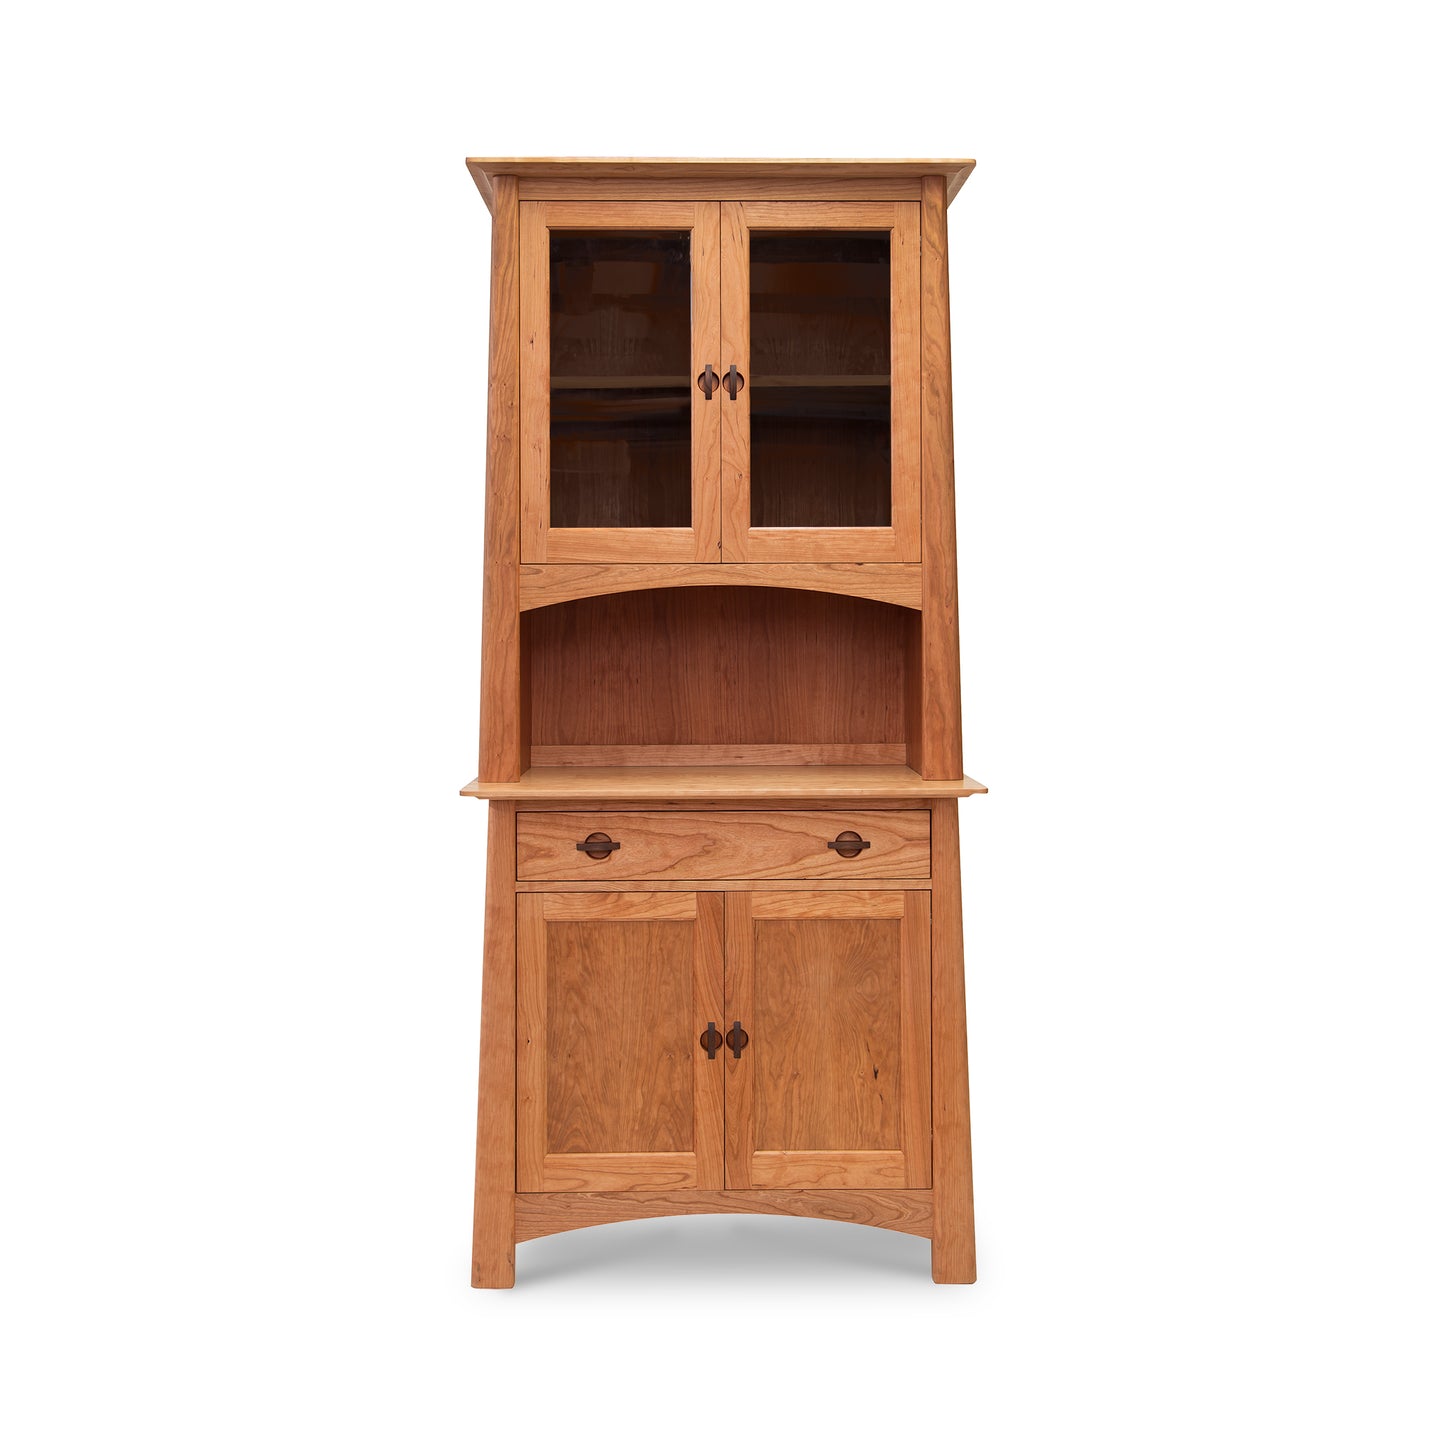 A Maple Corner Woodworks Cherry Moon Small China Cabinet with glass-paneled upper doors and solid lower doors on a white background.